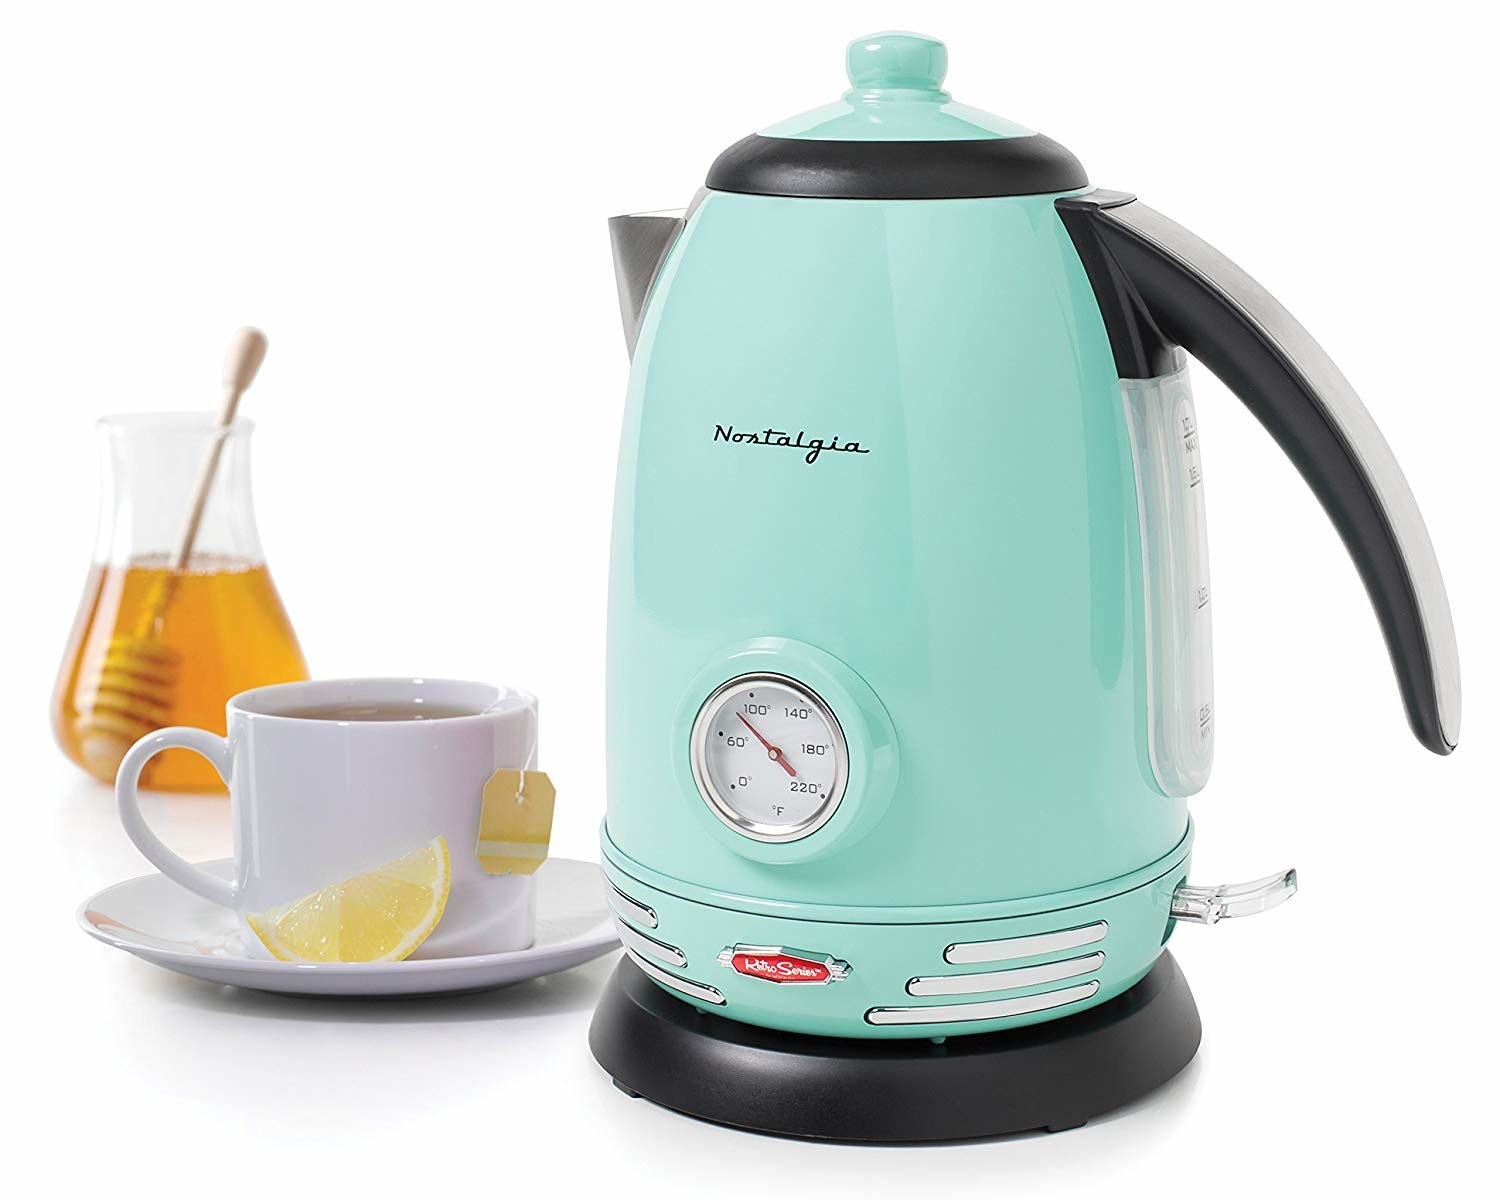 the mint green kettle with a temperature gauge on the front